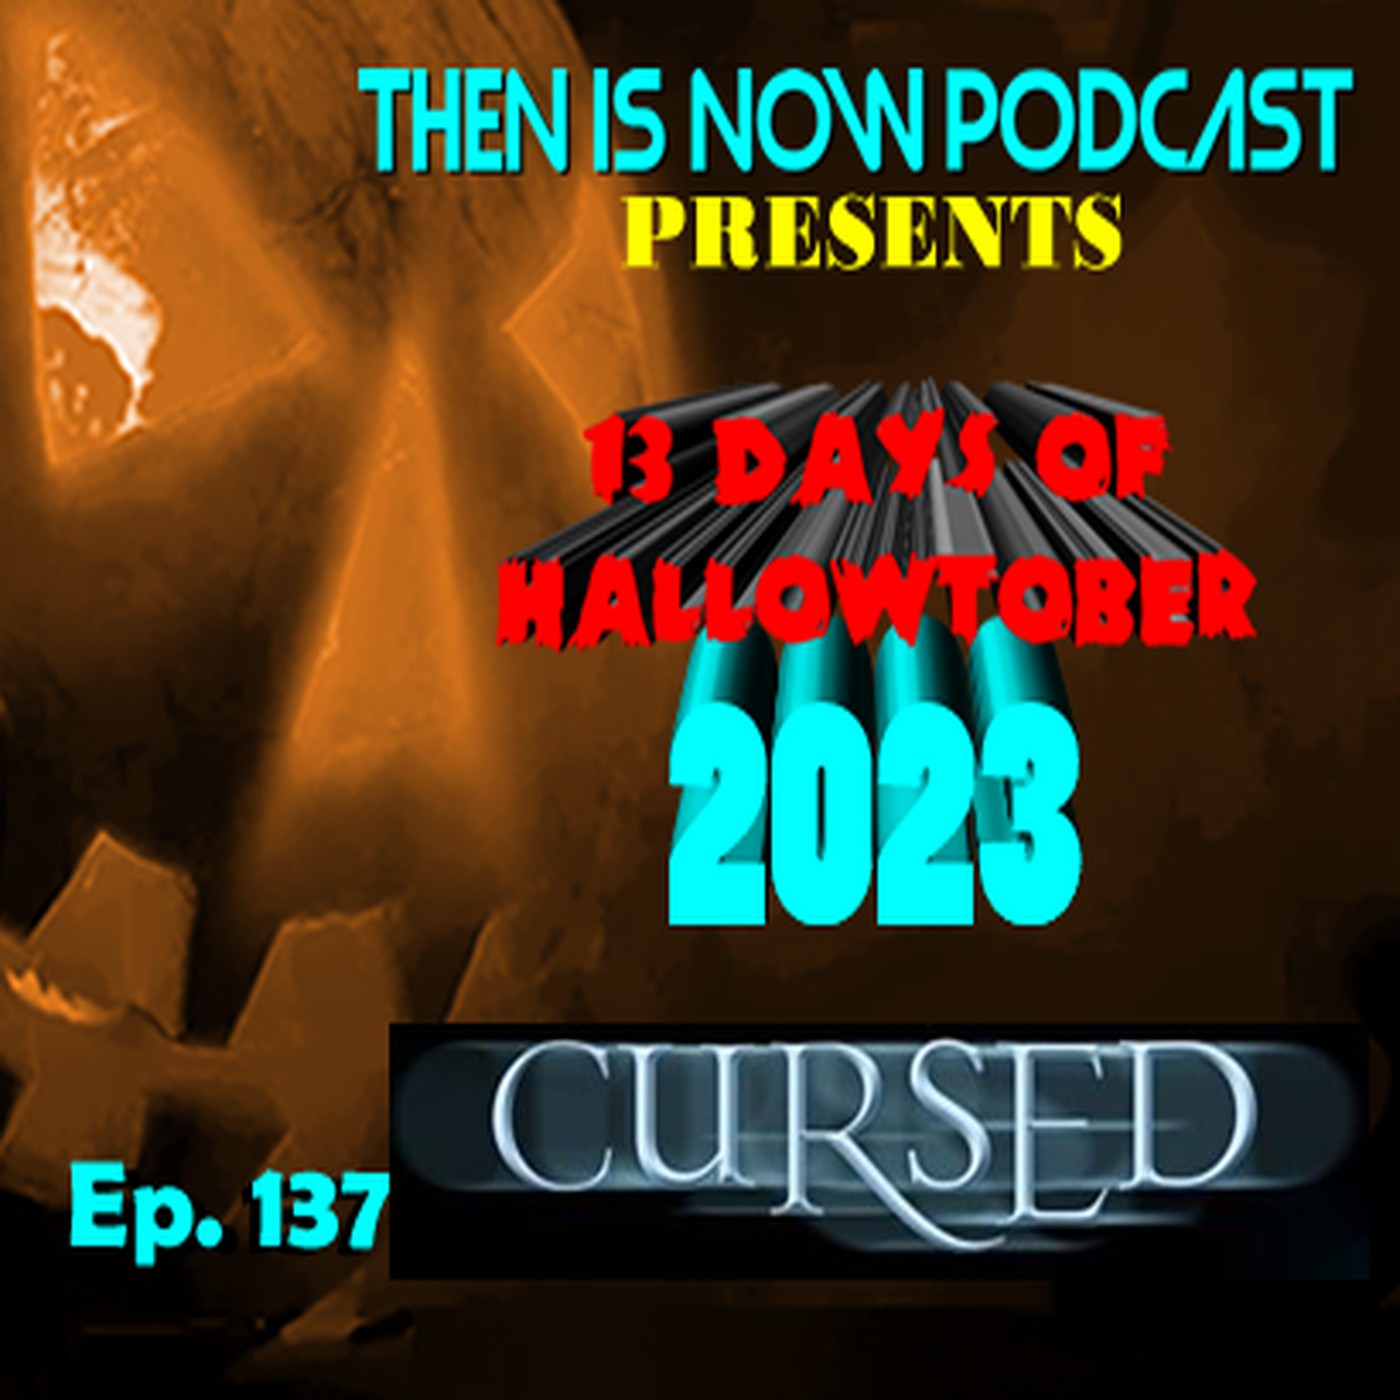 Then Is Now Ep. 137 - 13 Days of Hallowtober 2023 - Cursed (2005)